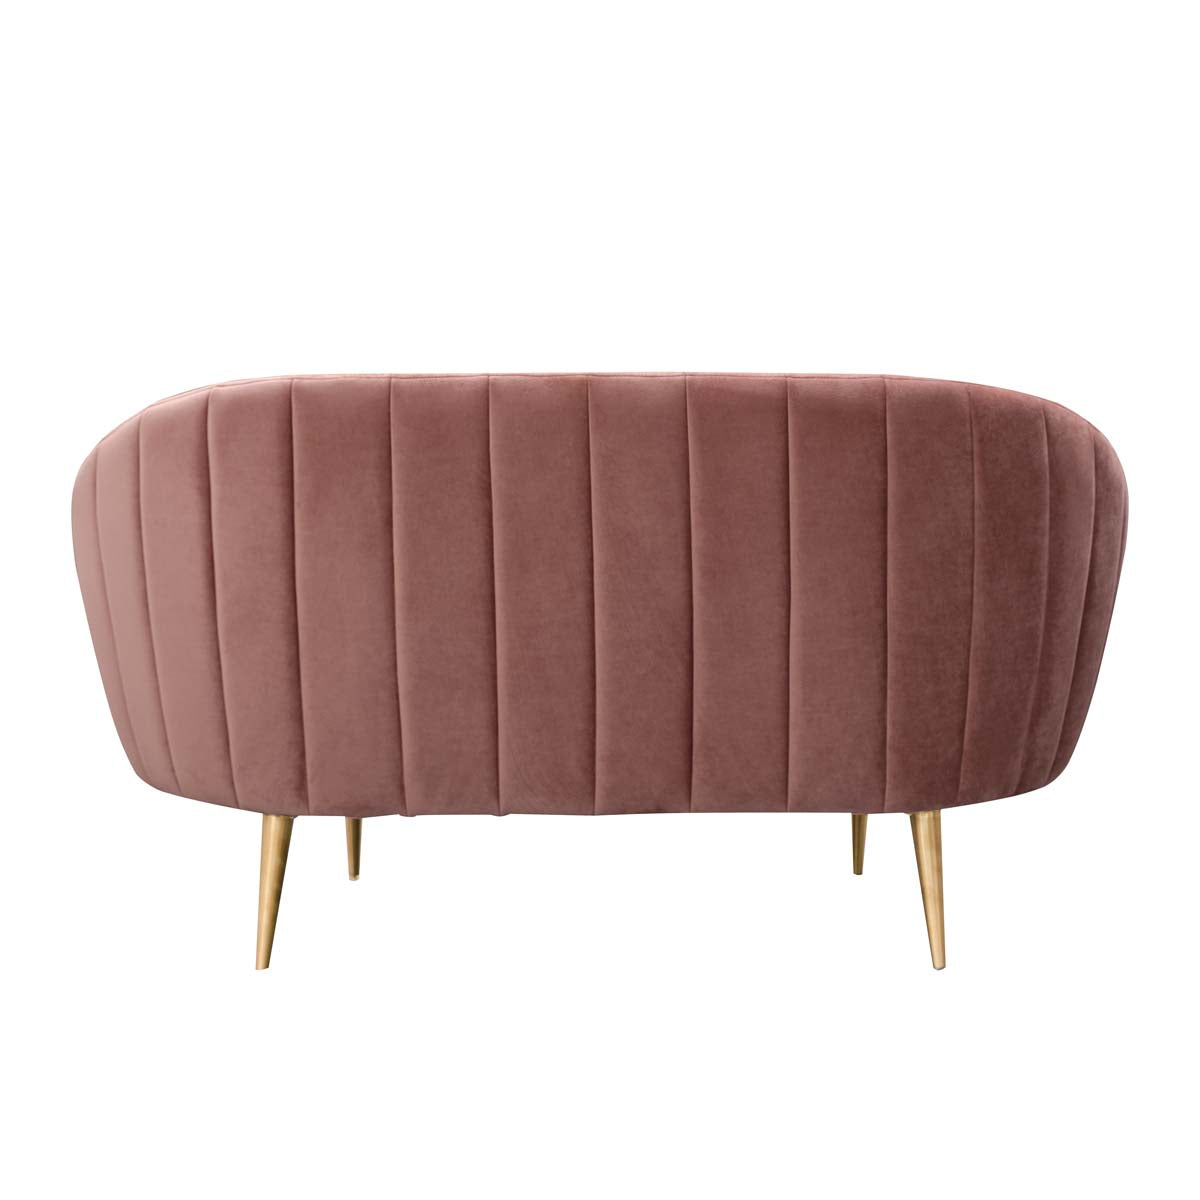 Safavieh Couture Razia Channel Tufted Tub Loveseat - Dusty Rose / Gold